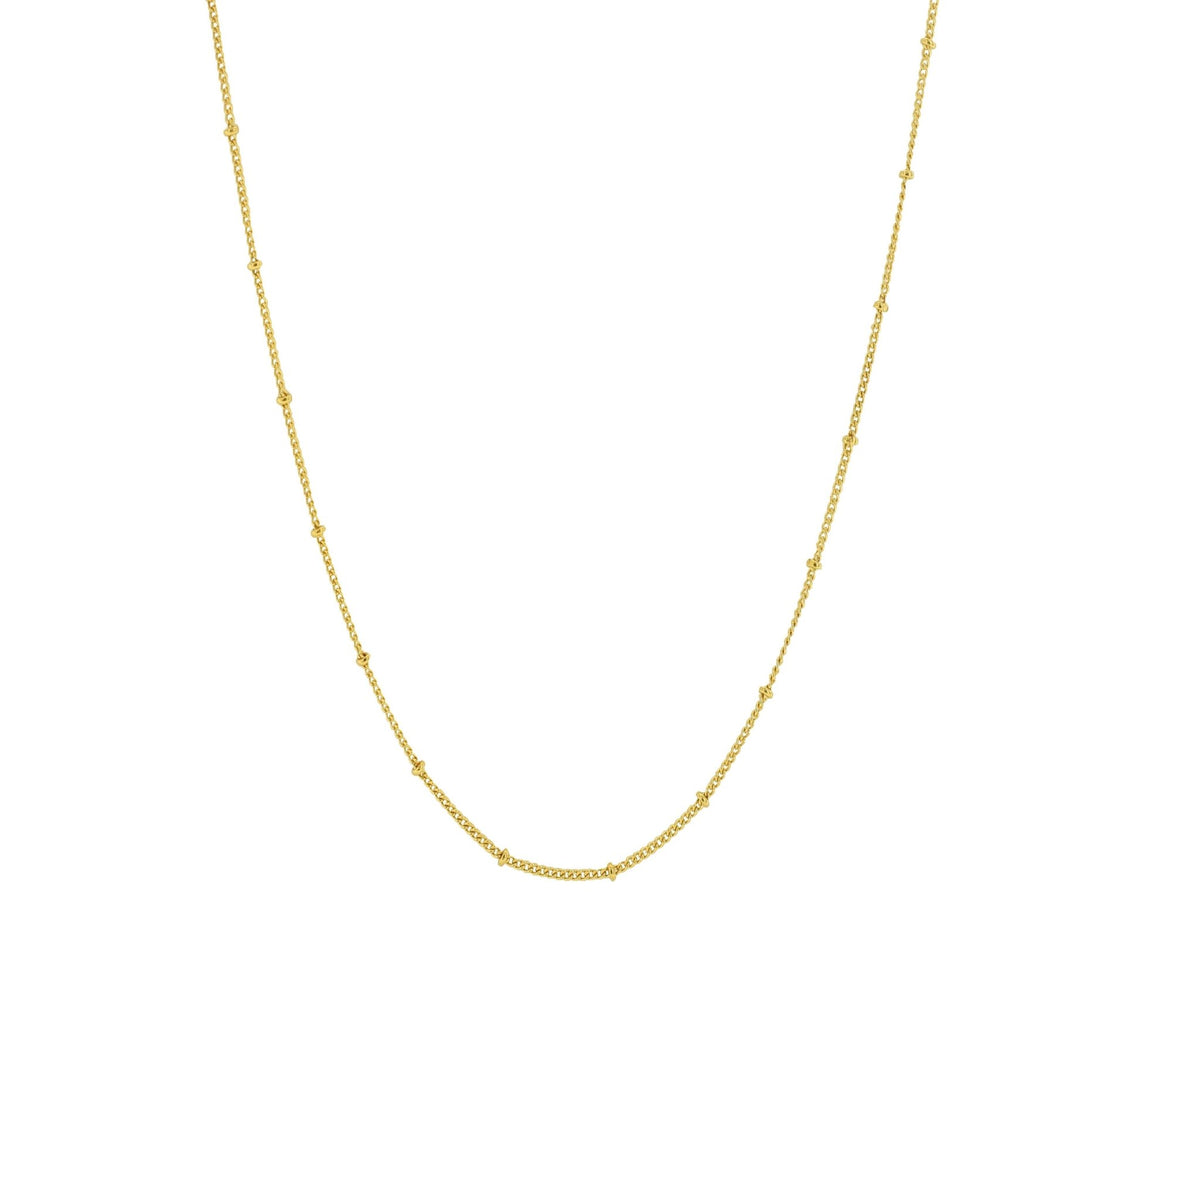 CHARMING 22-24&quot; BEADED NECKLACE GOLD- PREORDER - SO PRETTY CARA COTTER